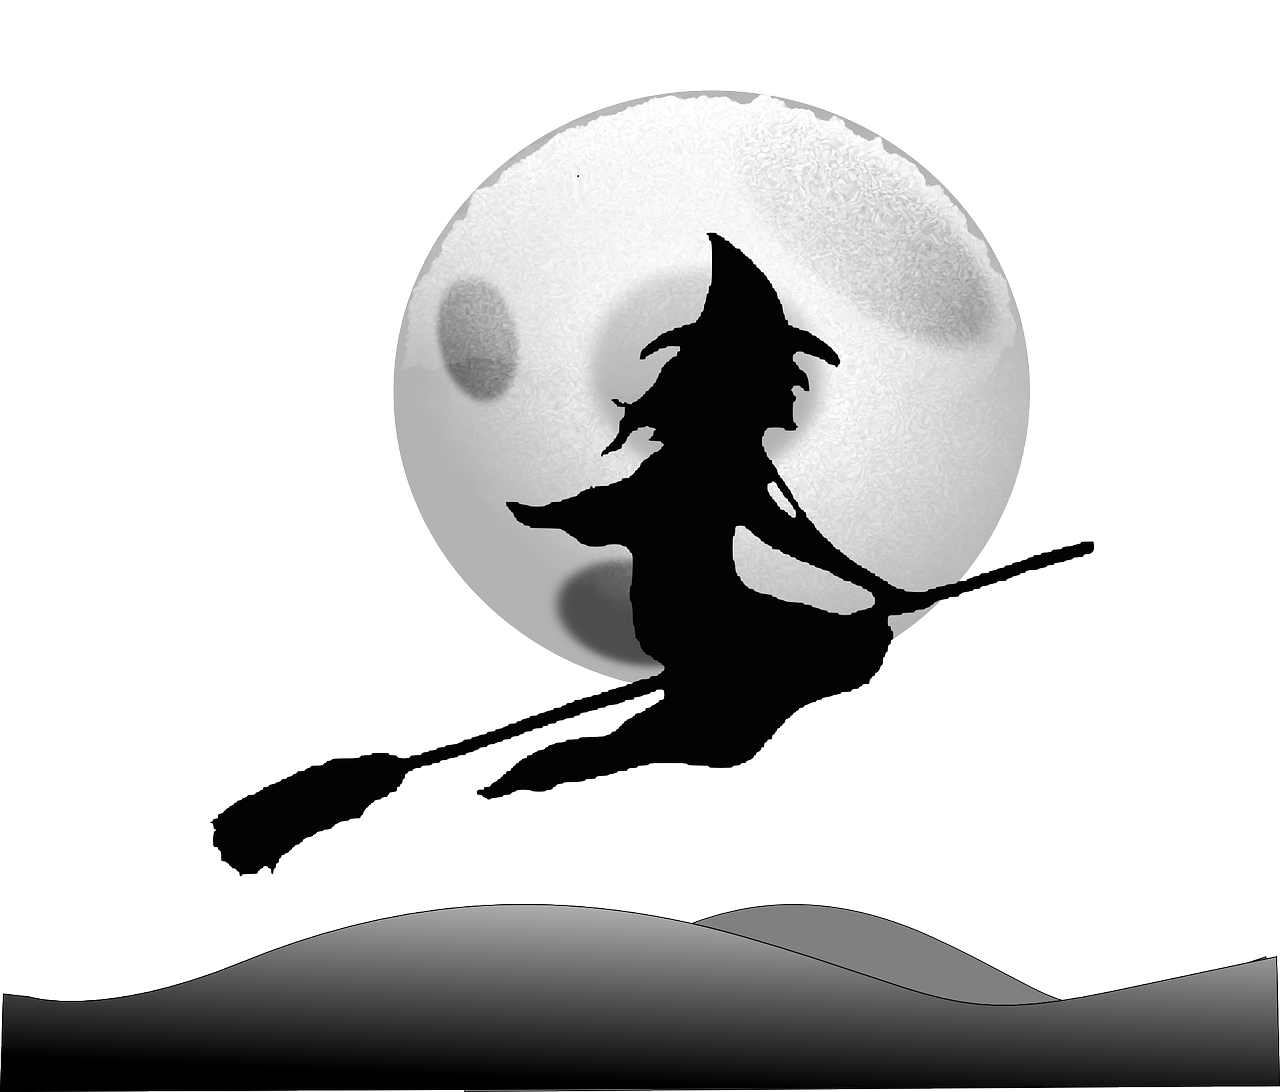 Download free photo of Witch,witchcraft,broom,broomstick,flying - from need...